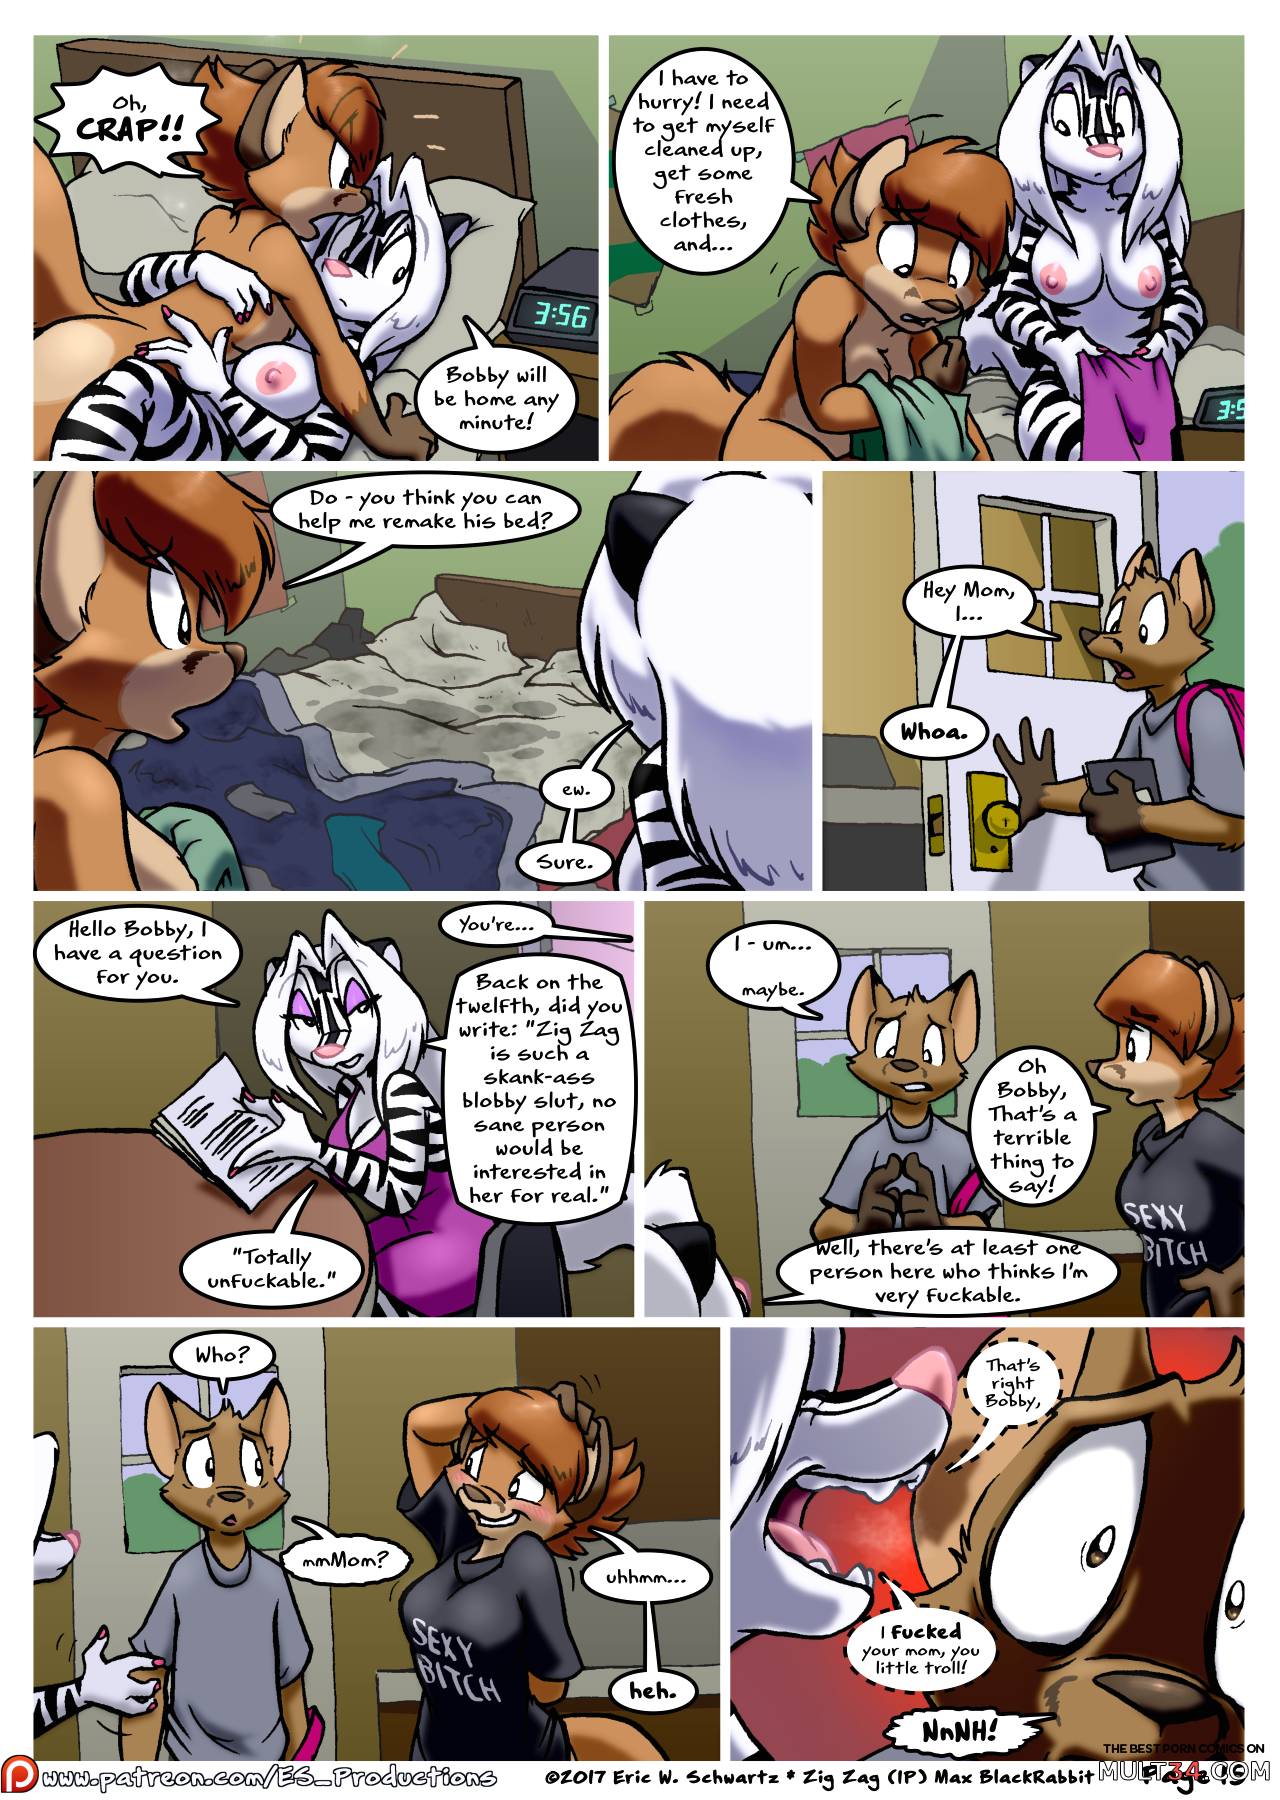 Adventure Begins at Home page 16